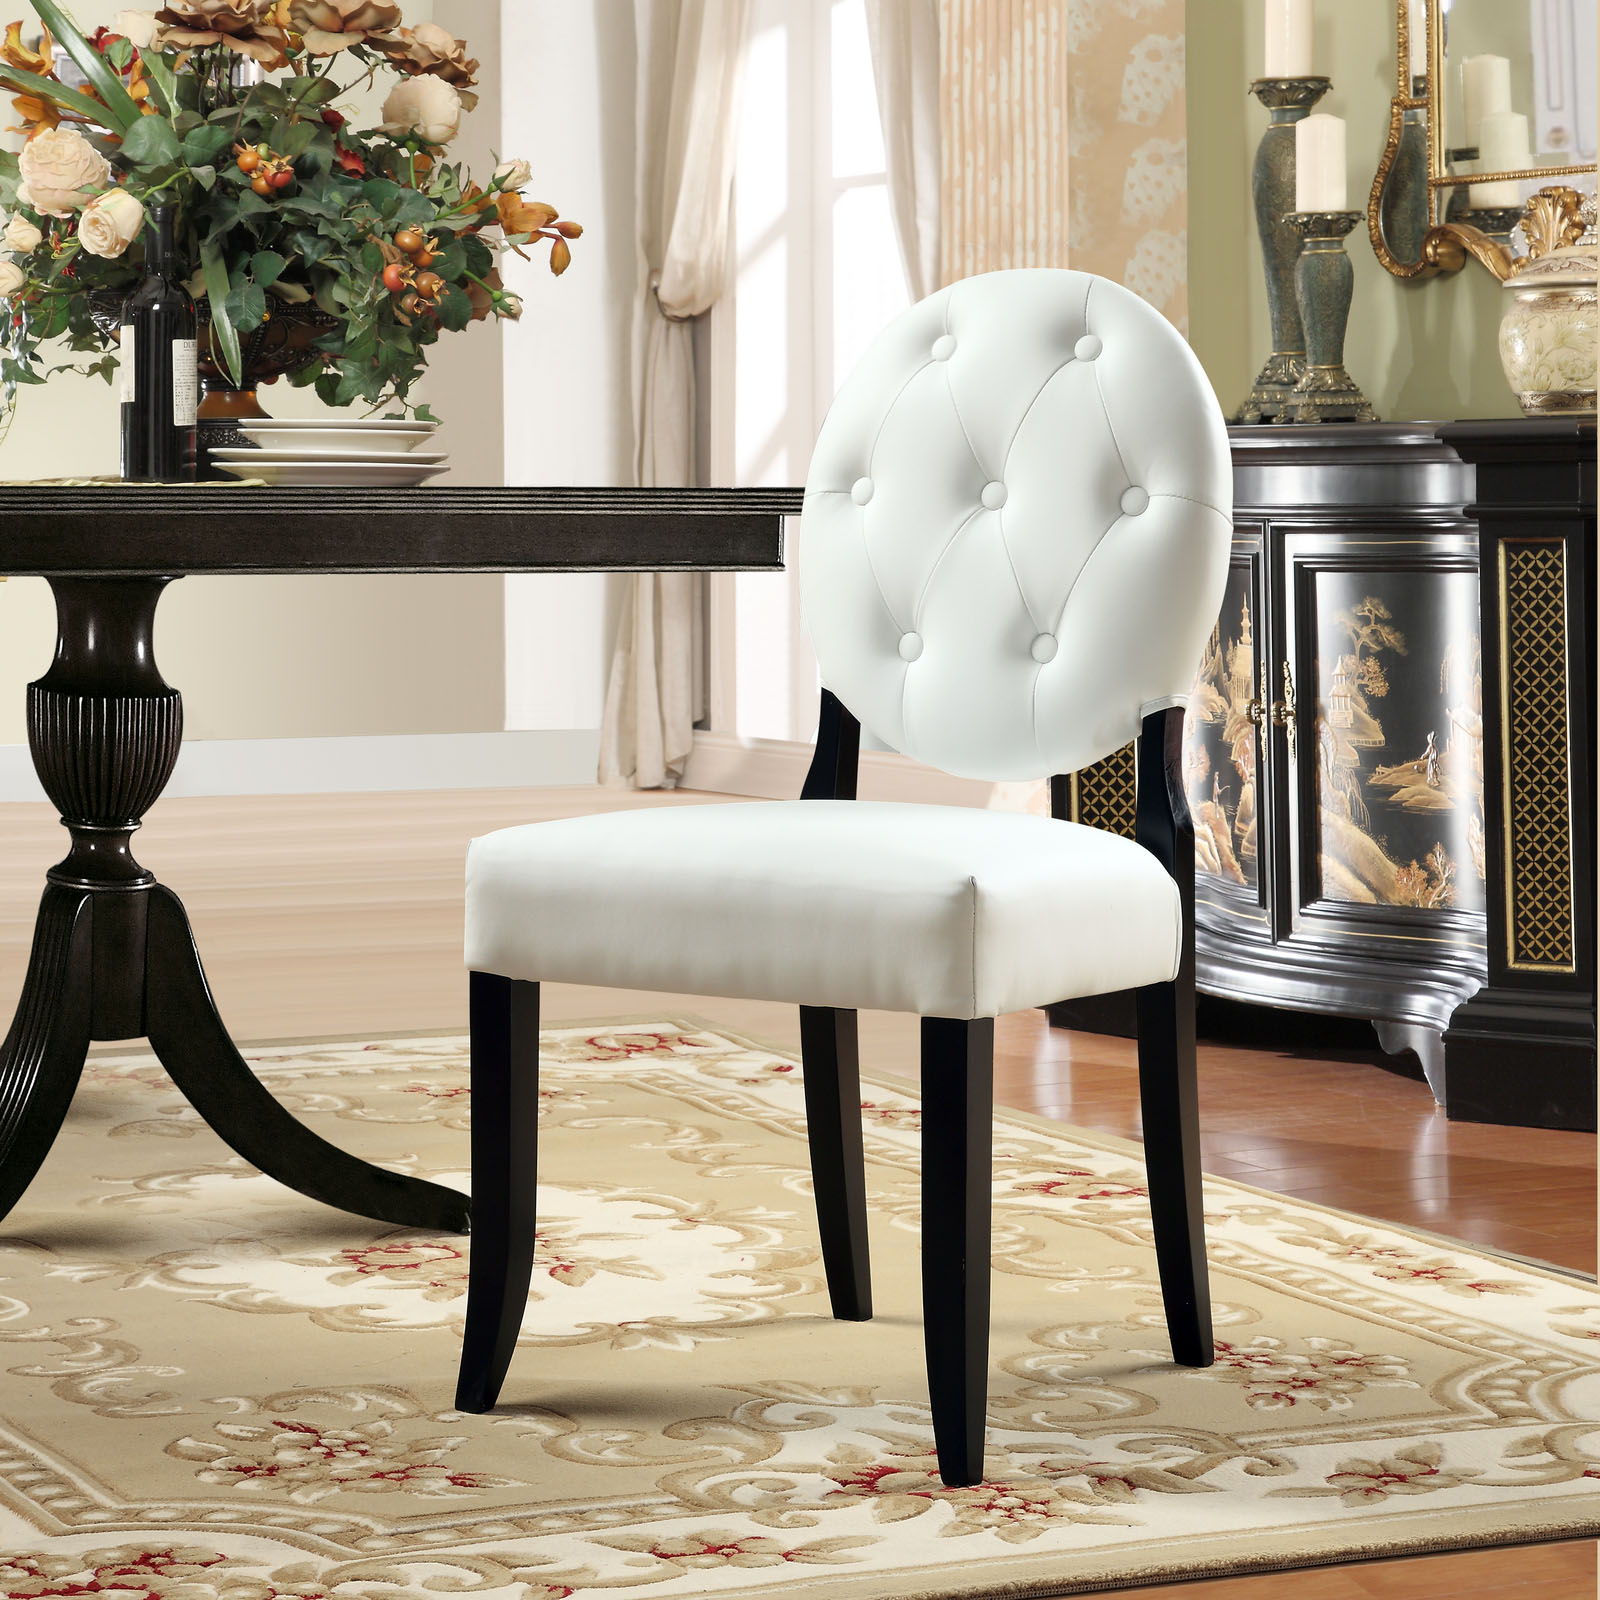 Lexmod Buttoned Ghost Chair in White Vinyl with Black Legs